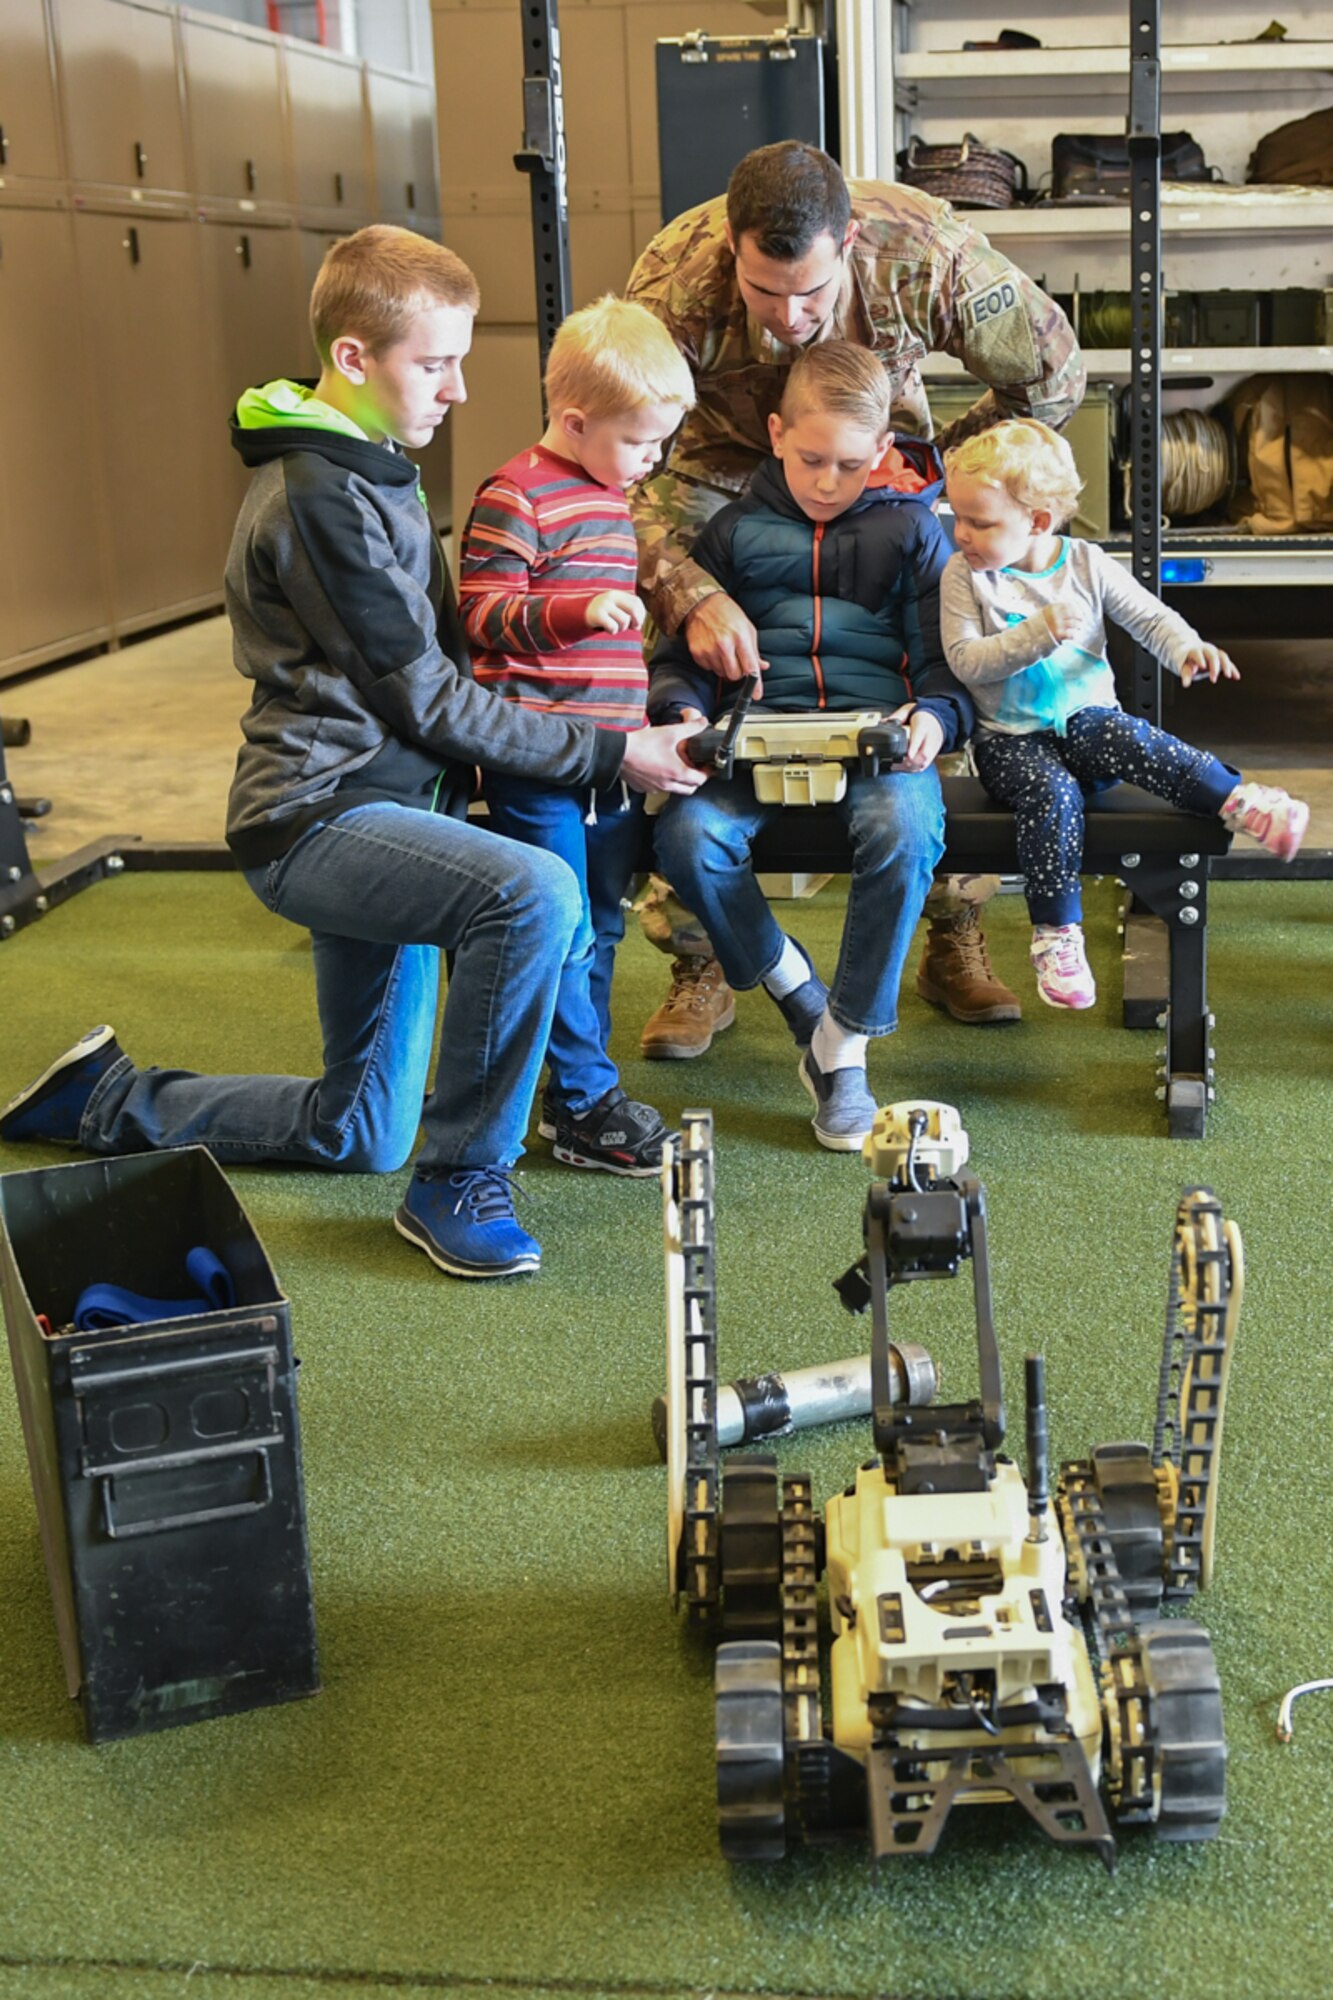 Capt. Nathan Demers, 775th Explosive Ordinance Disposal Flight, helps children operate a robot during a visit to EOD Oct. 11, 2018, at Hill Air Force Base, Utah. The visit was part of a 75th Air Base Wing-hosted base tour for Make-A-Wish Utah children and their families. (U.S. Air Force photo by Cynthia Griggs)